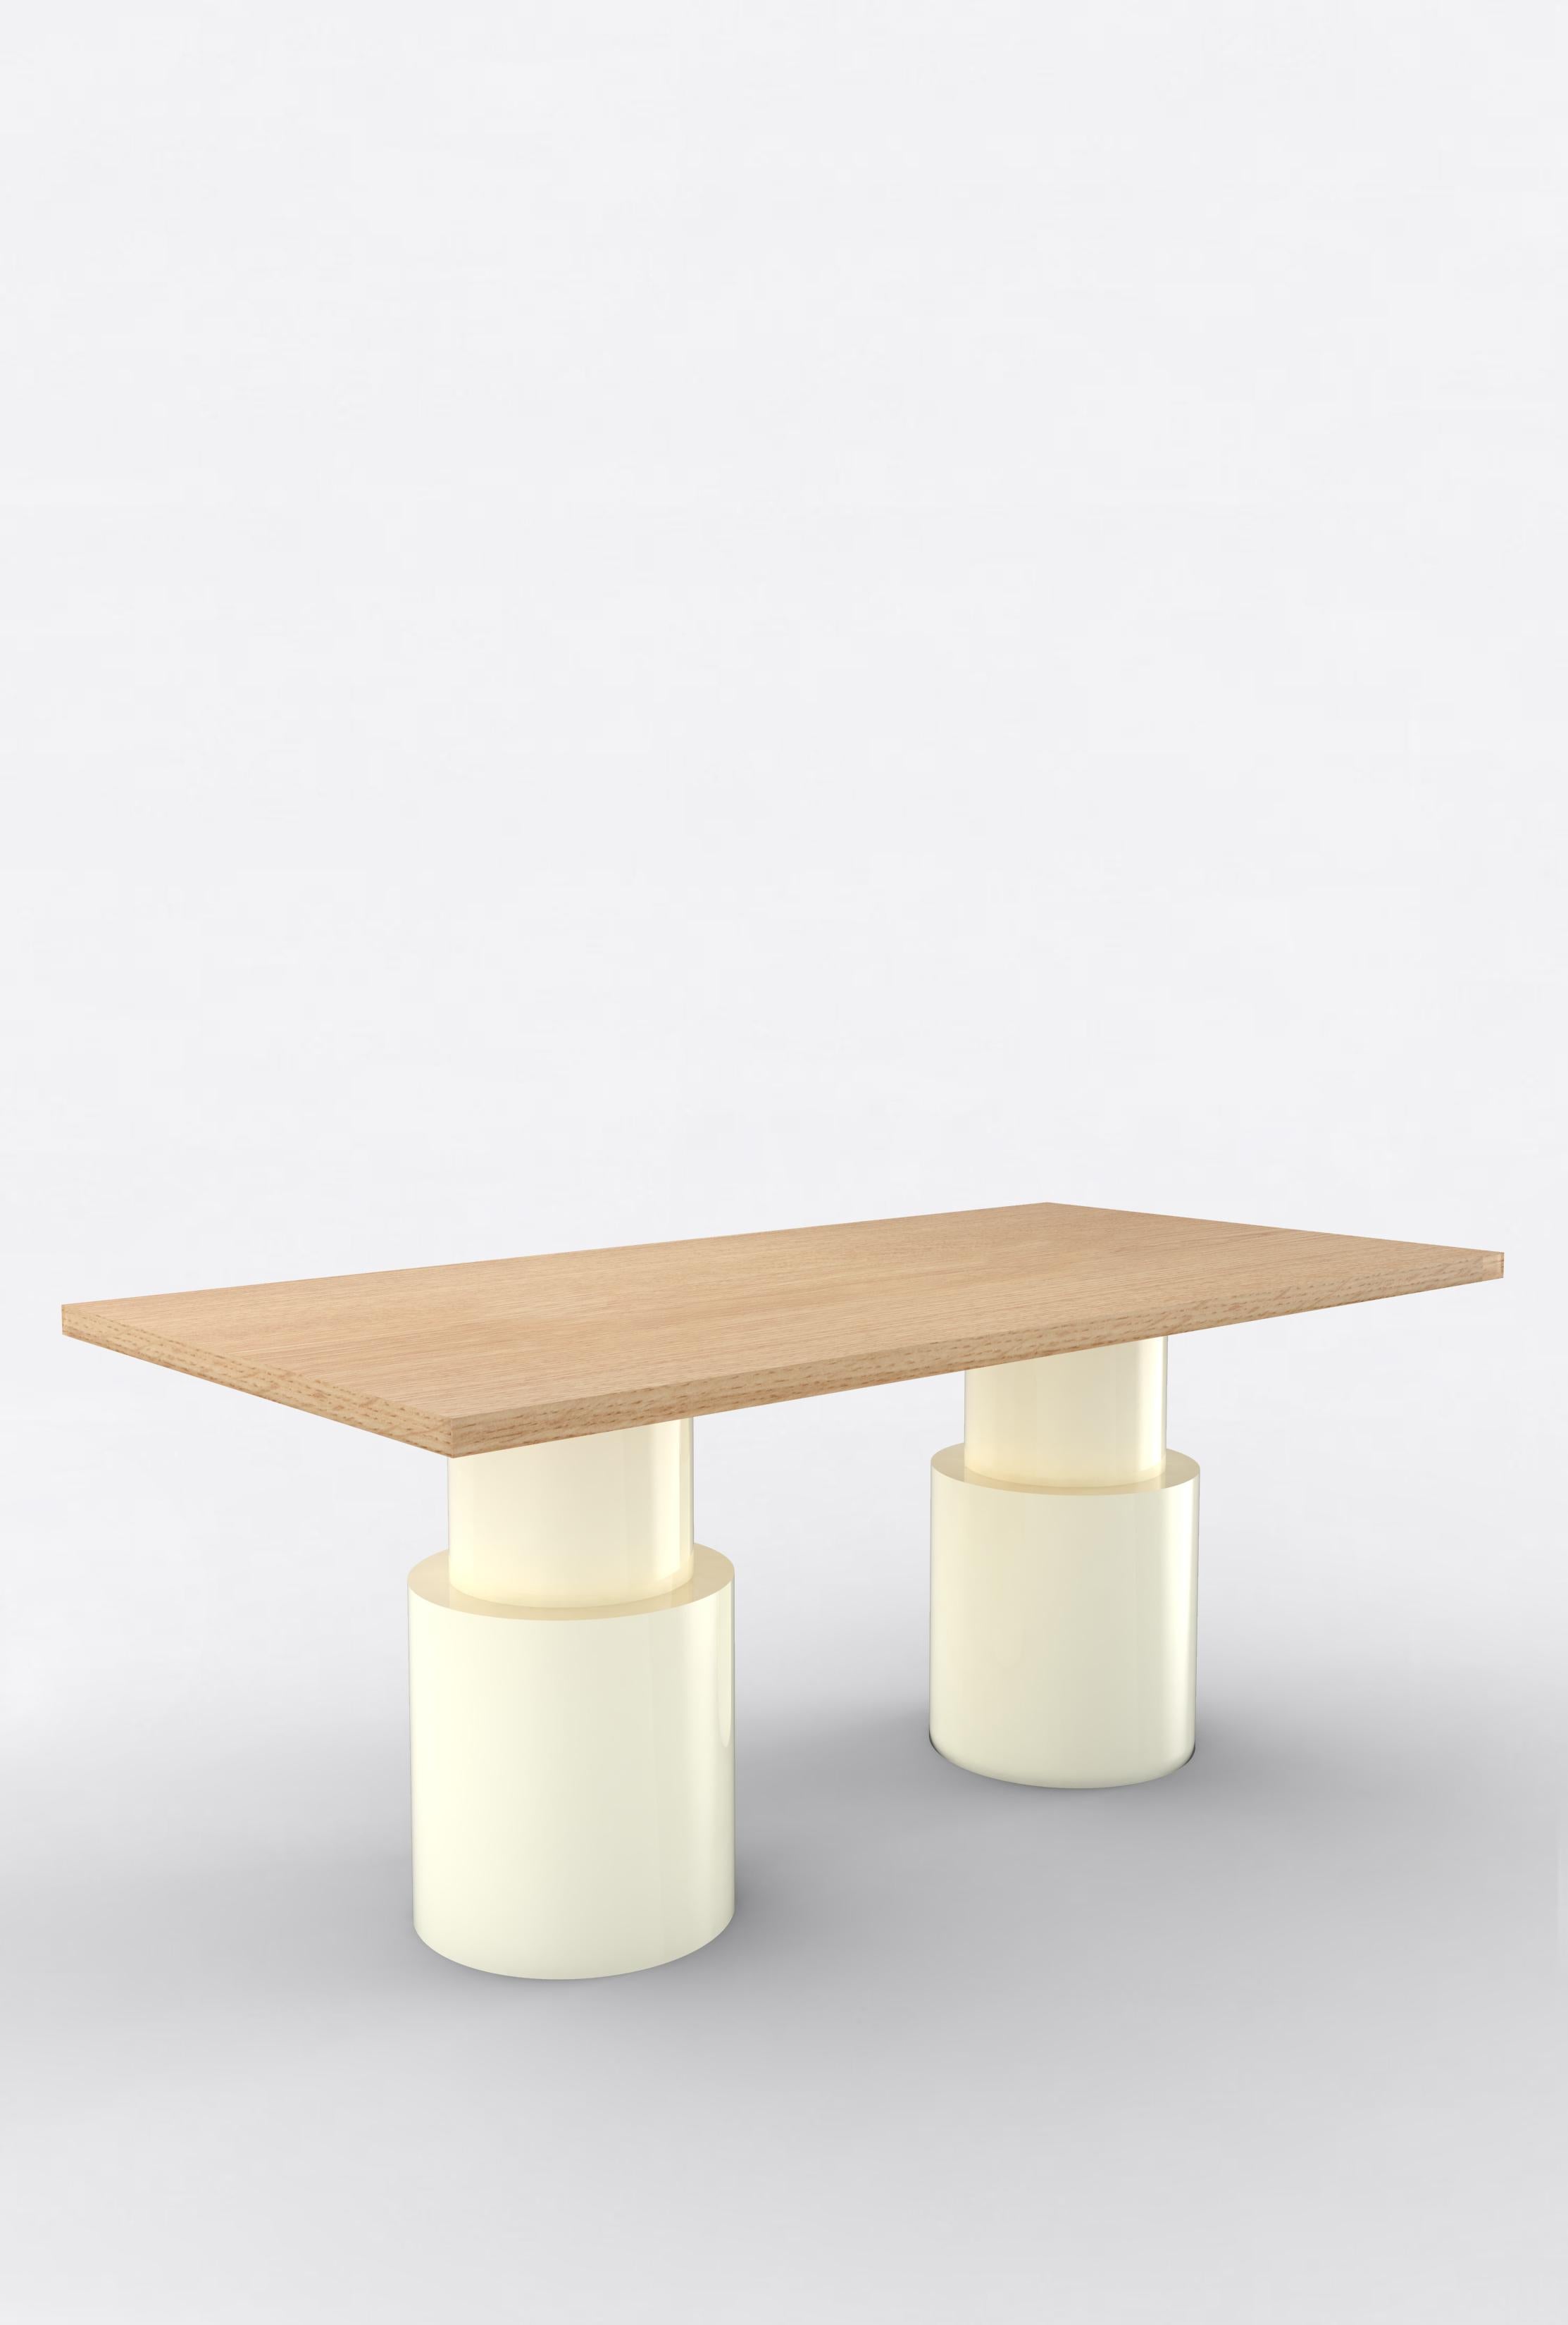 Orphan work 102 Dining Table
Shown in oak and white or off-white
Available in natural oak with painted base
Measures: 108” L x 36” W x 30” H
Dimensions available:
72” L X 36” W X 30” H
84” L X 36” W X 30” H
96” L X 36” W X 30” H
108” L X 42” W X 30”